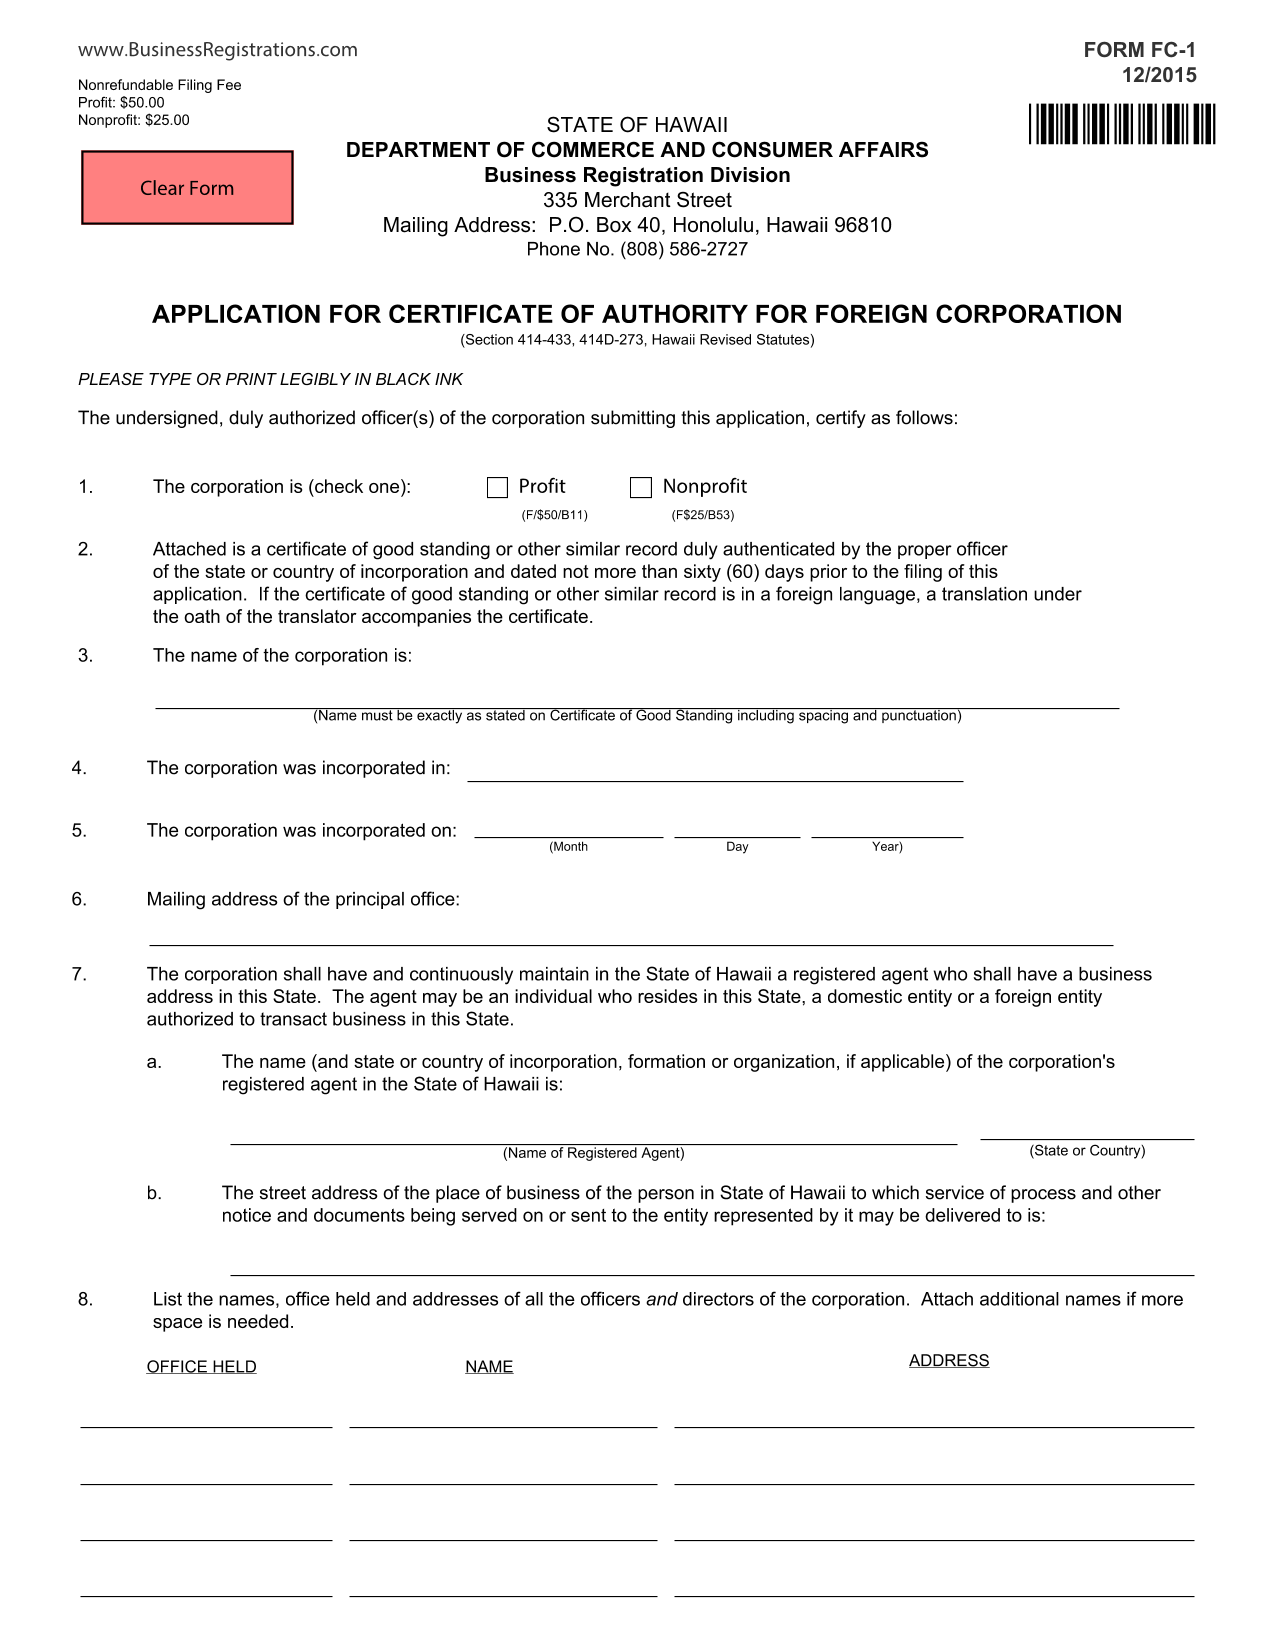 hawaii-certificate-of-authority-for-foreign-corporation